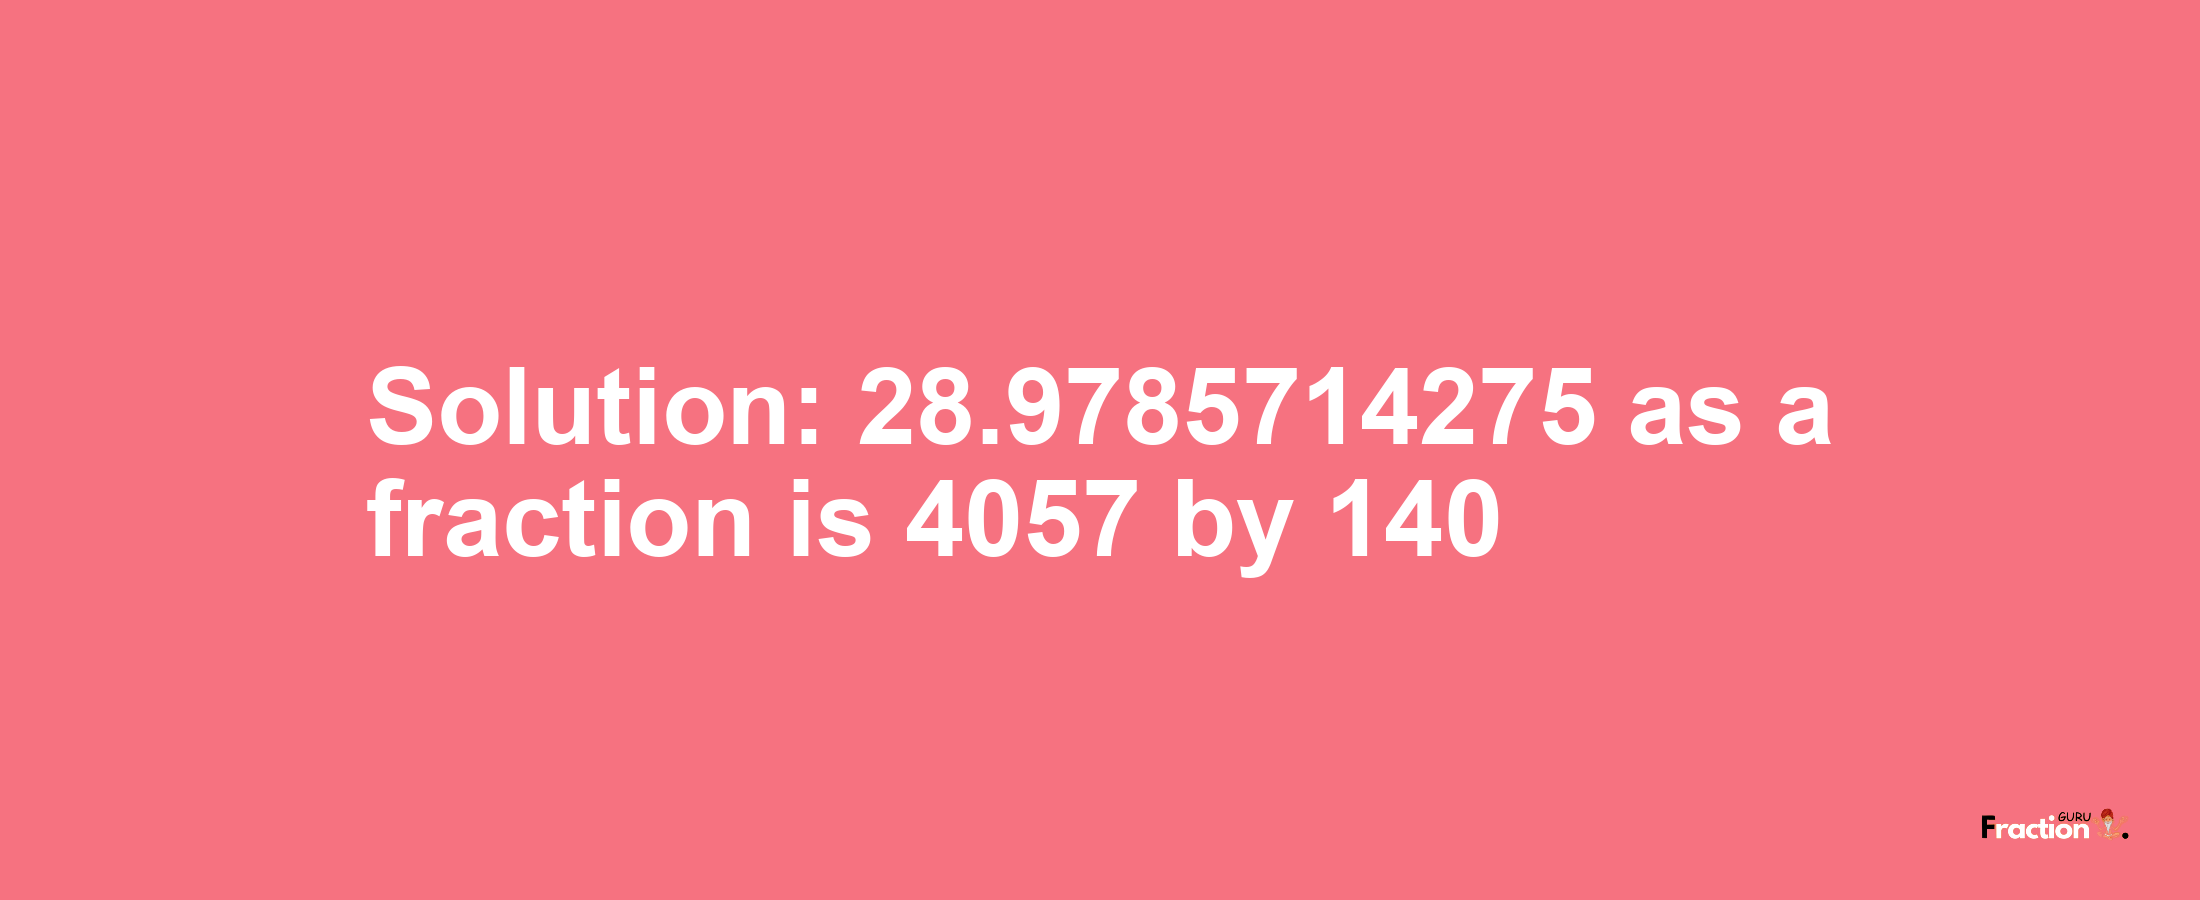 Solution:28.9785714275 as a fraction is 4057/140